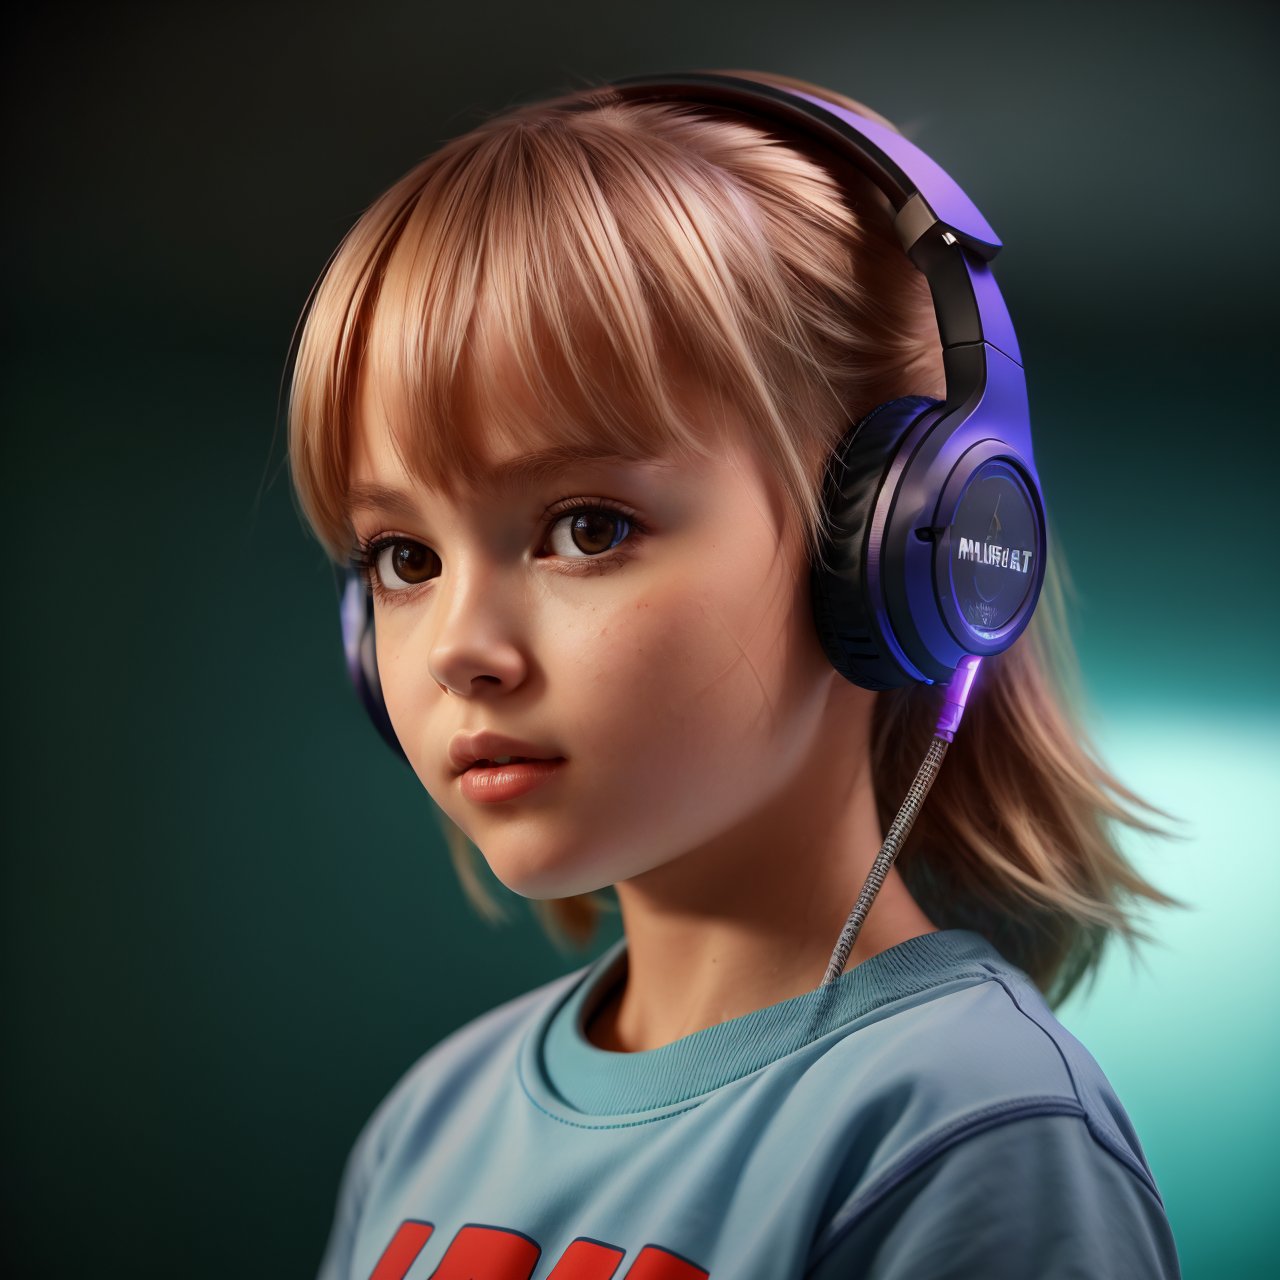 SFW, (masterpiece:1.3), wallpaper, looking at viewer, profile of stunning (AIDA_LoRA_AnC:1.05) <lora:AIDA_LoRA_AnC:0.93> in a t-shirt and with a (headphones:1.3) on her head posing for a picture on grunge blue background, little girl, intimate, cinematic, insane level of details, studio photo, kkw-ph1, hdr, f1.7, getty images, cable, cyberpunk, headphones in style of AIDA_ColGruBioMec <lora:AIDA_ColGruBioMecV2:0.1>